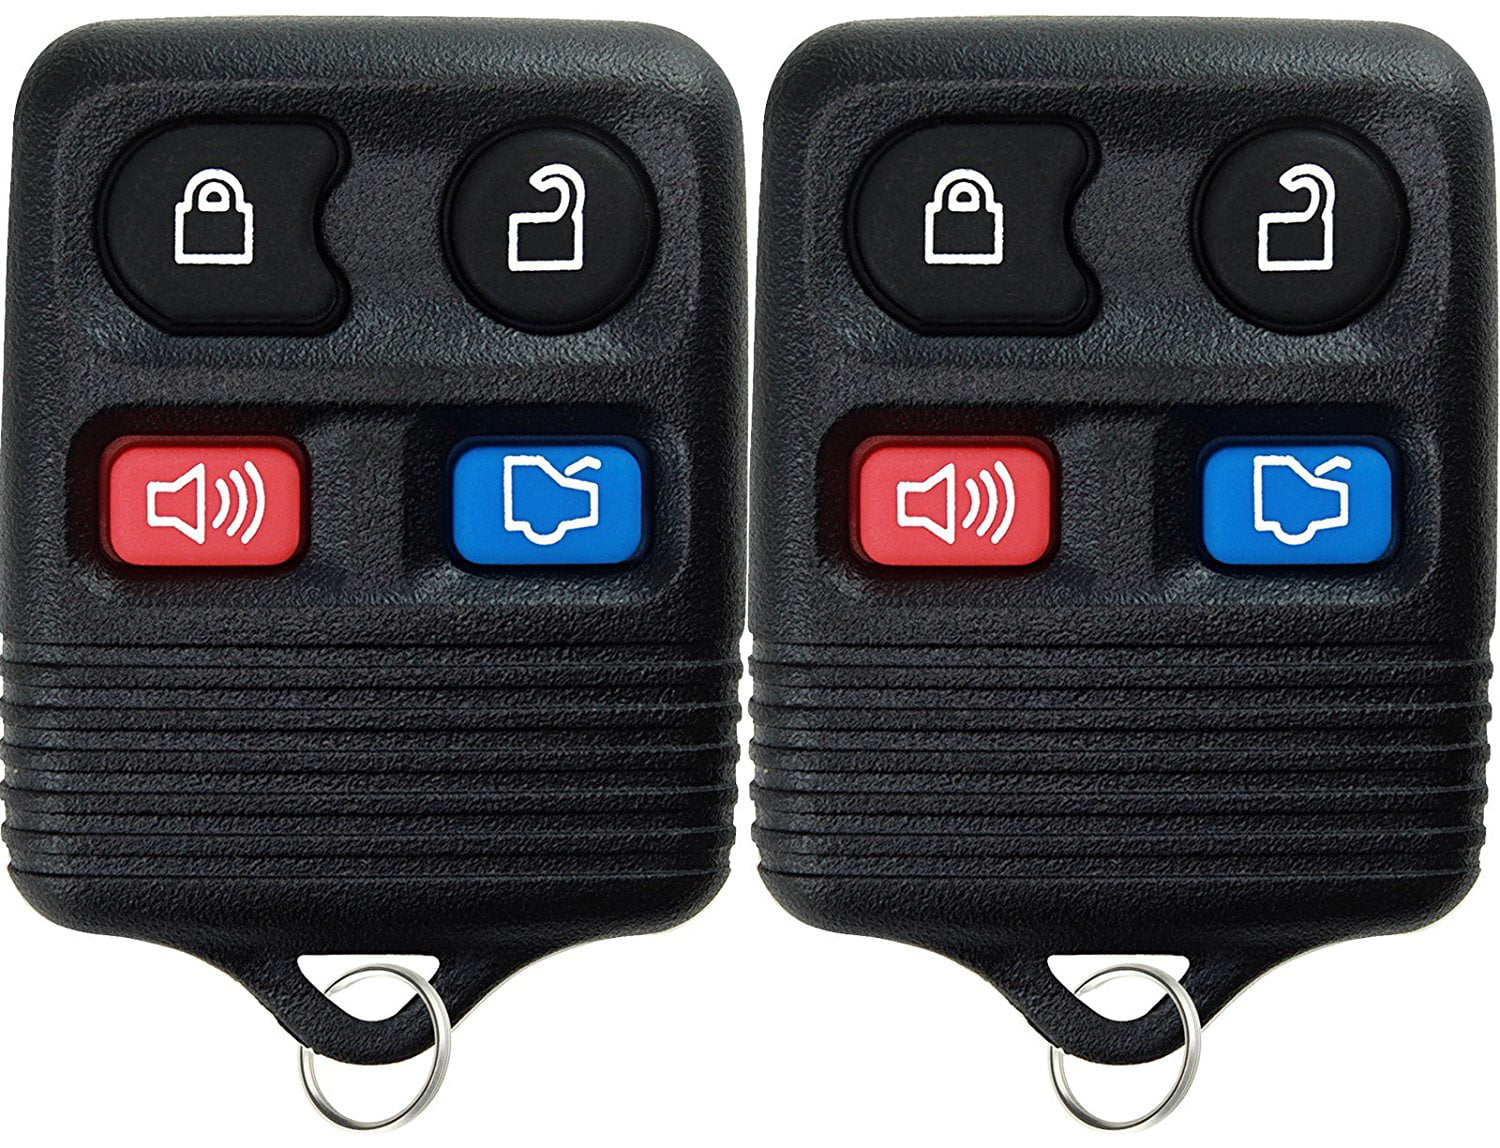 Details about   NEW Keyless Entry Key Fob Remote For a 2004 Ford Taurus 4 Button DIY Programming 